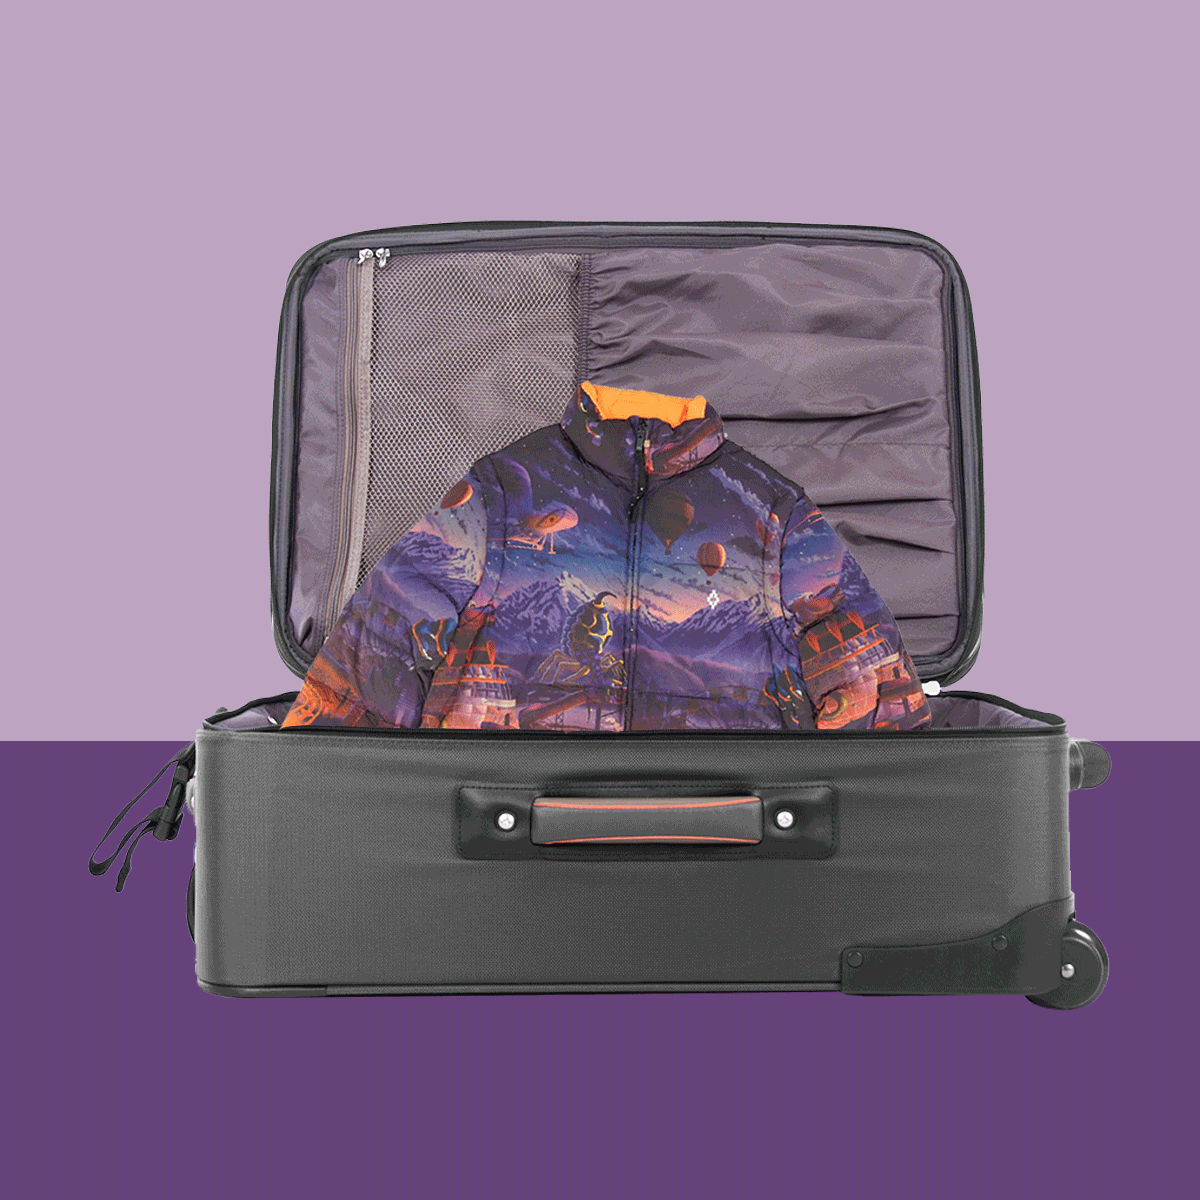 products coming out of suitcase on purple background